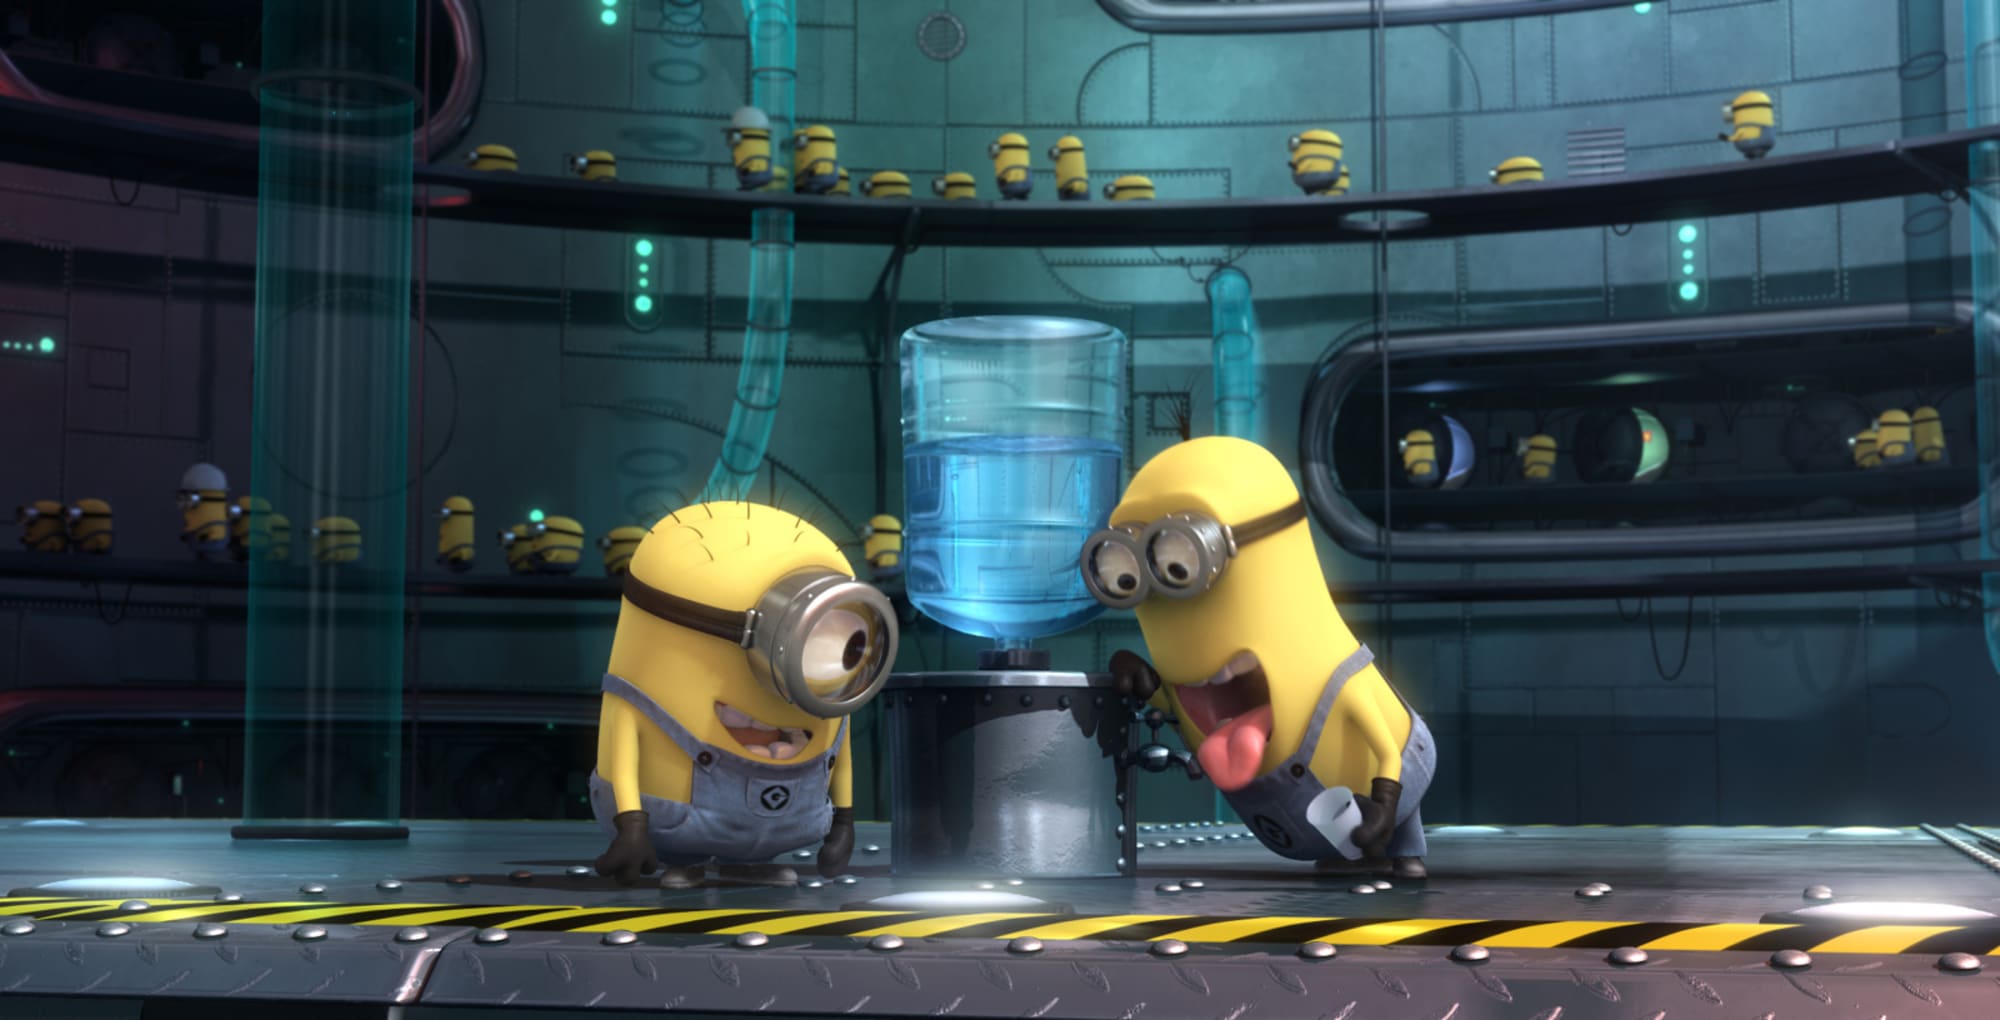 Are the Minions movies on Netflix? Where to stream the Minions films